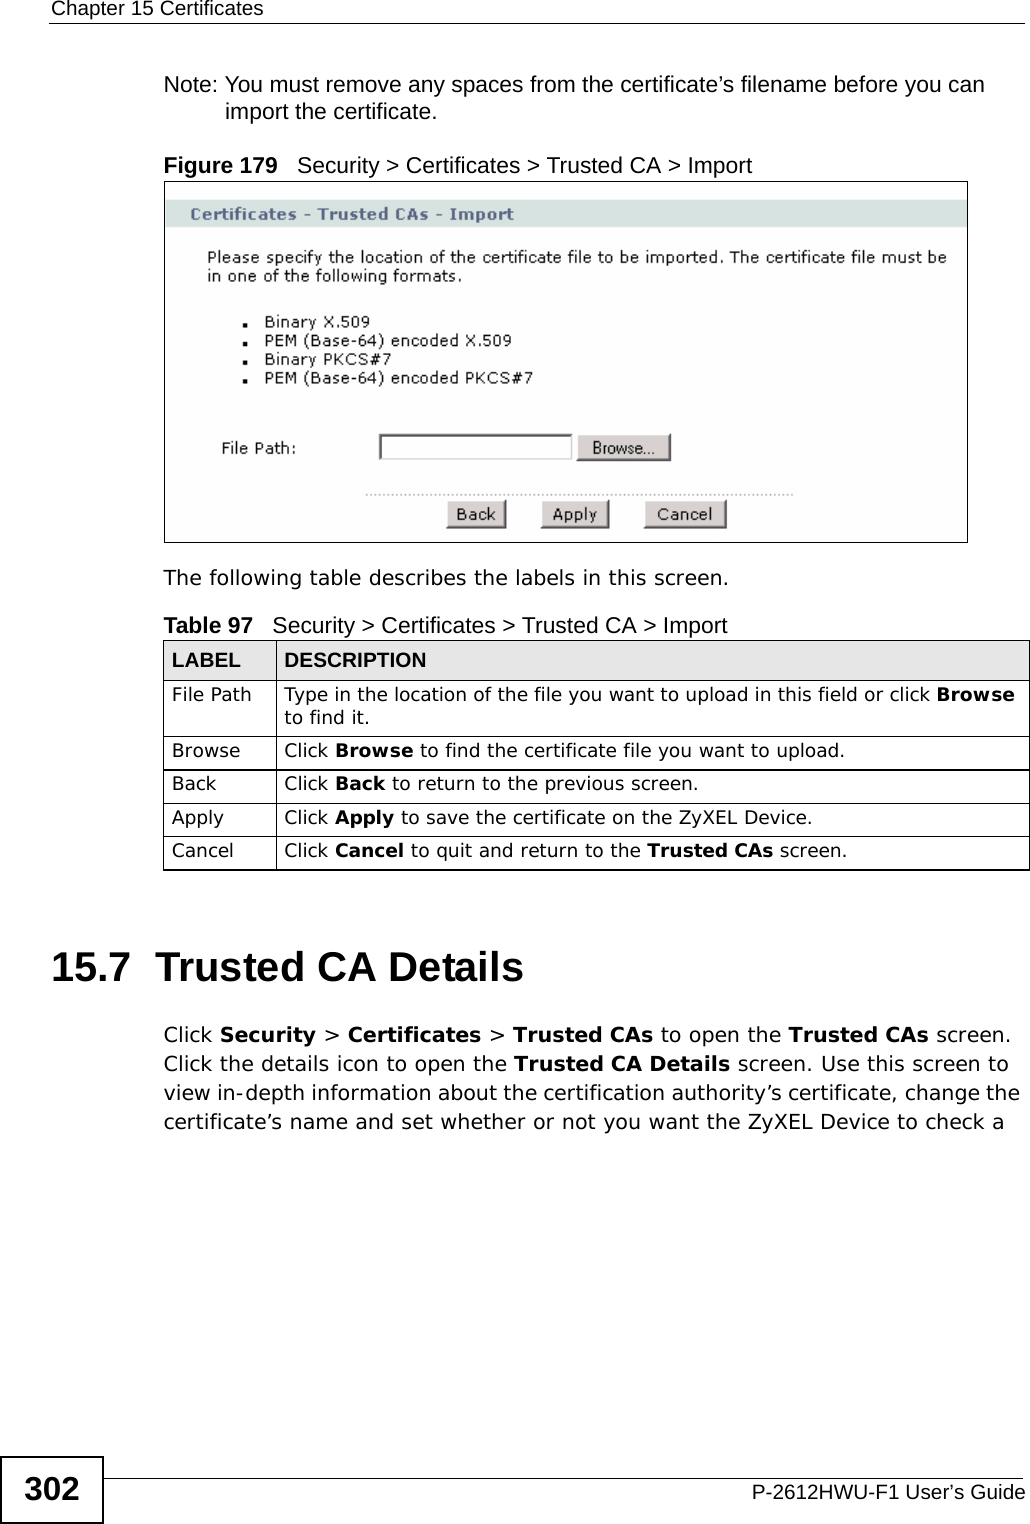 Chapter 15 CertificatesP-2612HWU-F1 User’s Guide302Note: You must remove any spaces from the certificate’s filename before you can import the certificate.Figure 179   Security &gt; Certificates &gt; Trusted CA &gt; ImportThe following table describes the labels in this screen.15.7  Trusted CA Details Click Security &gt; Certificates &gt; Trusted CAs to open the Trusted CAs screen. Click the details icon to open the Trusted CA Details screen. Use this screen to view in-depth information about the certification authority’s certificate, change the certificate’s name and set whether or not you want the ZyXEL Device to check a Table 97   Security &gt; Certificates &gt; Trusted CA &gt; ImportLABEL DESCRIPTIONFile Path  Type in the location of the file you want to upload in this field or click Browse to find it.Browse Click Browse to find the certificate file you want to upload. Back Click Back to return to the previous screen.Apply Click Apply to save the certificate on the ZyXEL Device.Cancel Click Cancel to quit and return to the Trusted CAs screen.